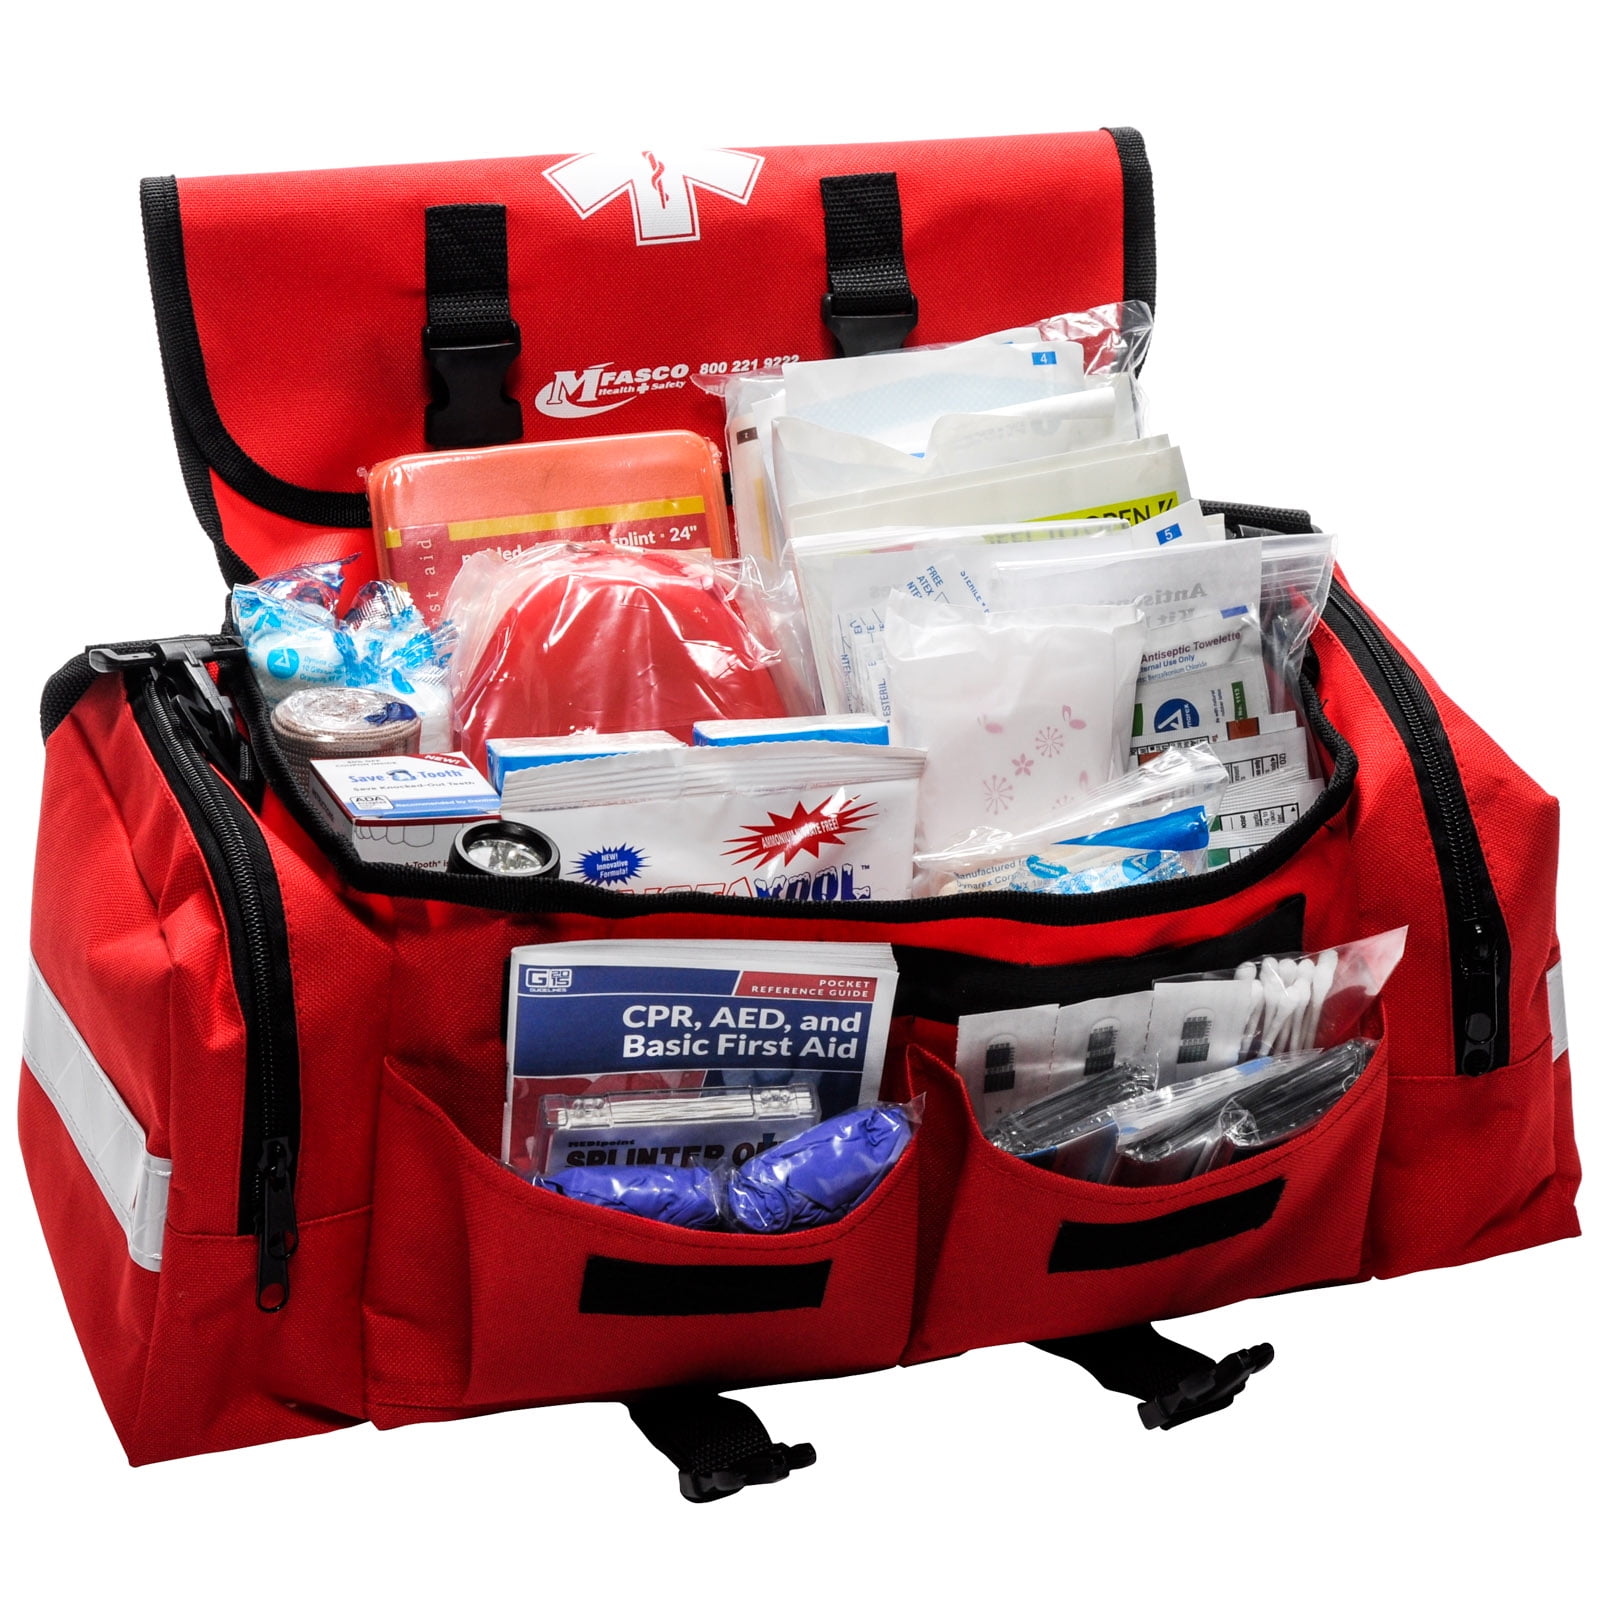 24 Instant Ice Cold Packs 6"x8" First Aid Emergency Survival EMT Paramedic Kits 